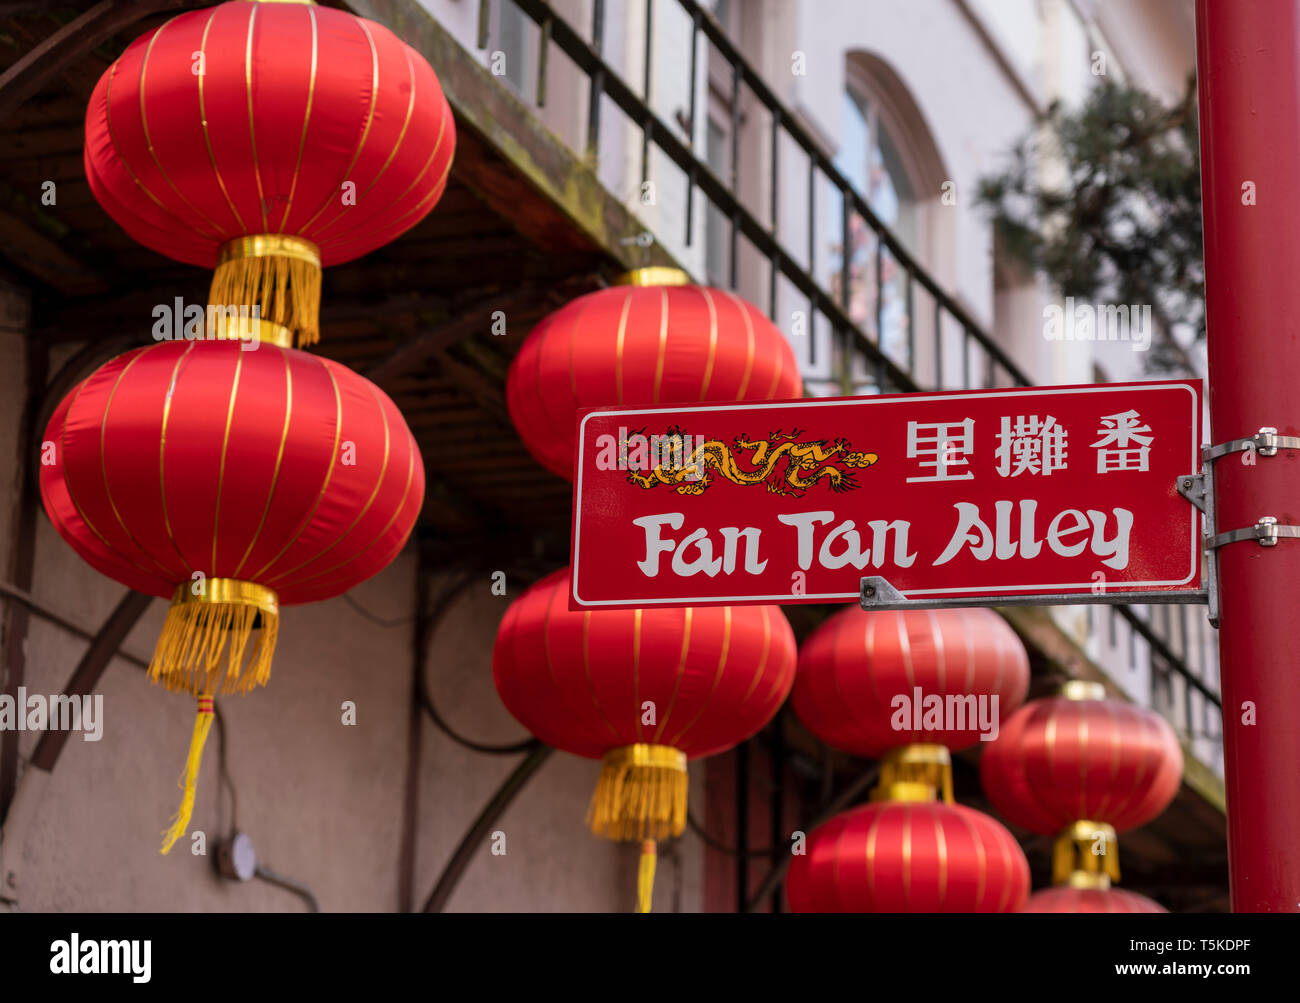 A sign for Fan Tan Alley in the Chinatown district of Victoria, British Columbia, Canada. Stock Photo